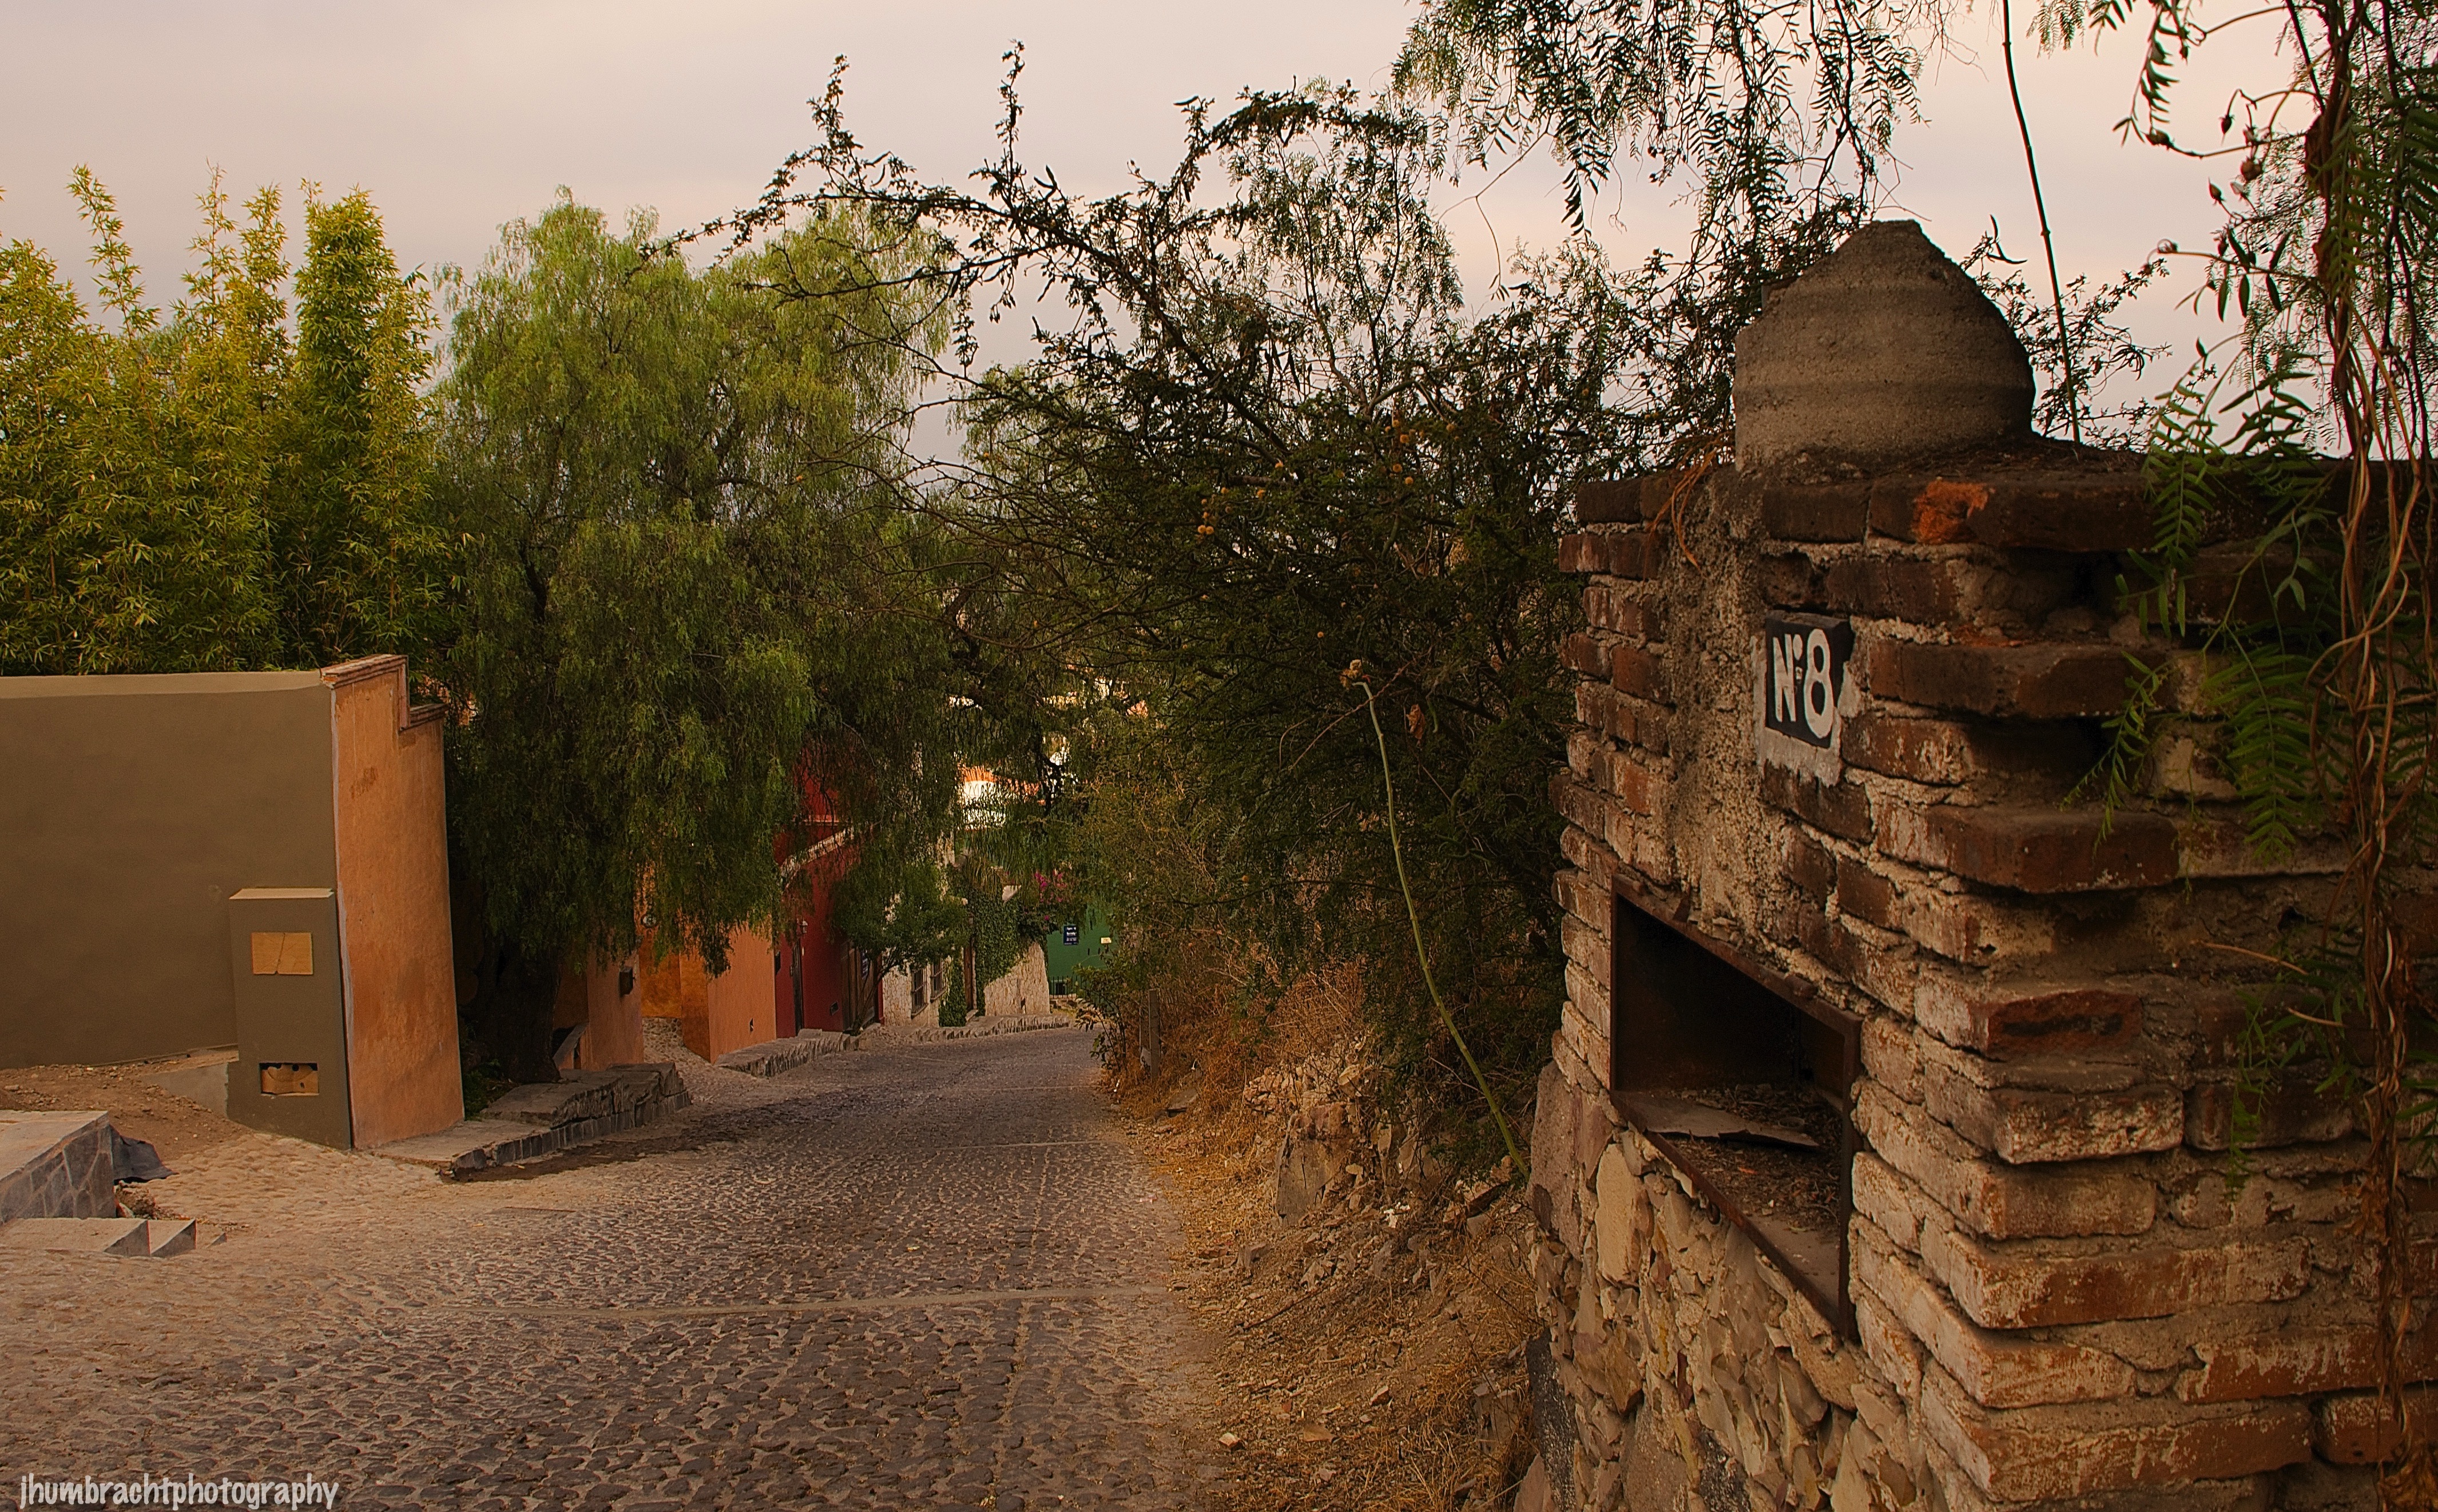 Architecture of San Miguel de Allende Mexico photo taken by Indiana Architectural Photographer Jason Humbracht in 2015